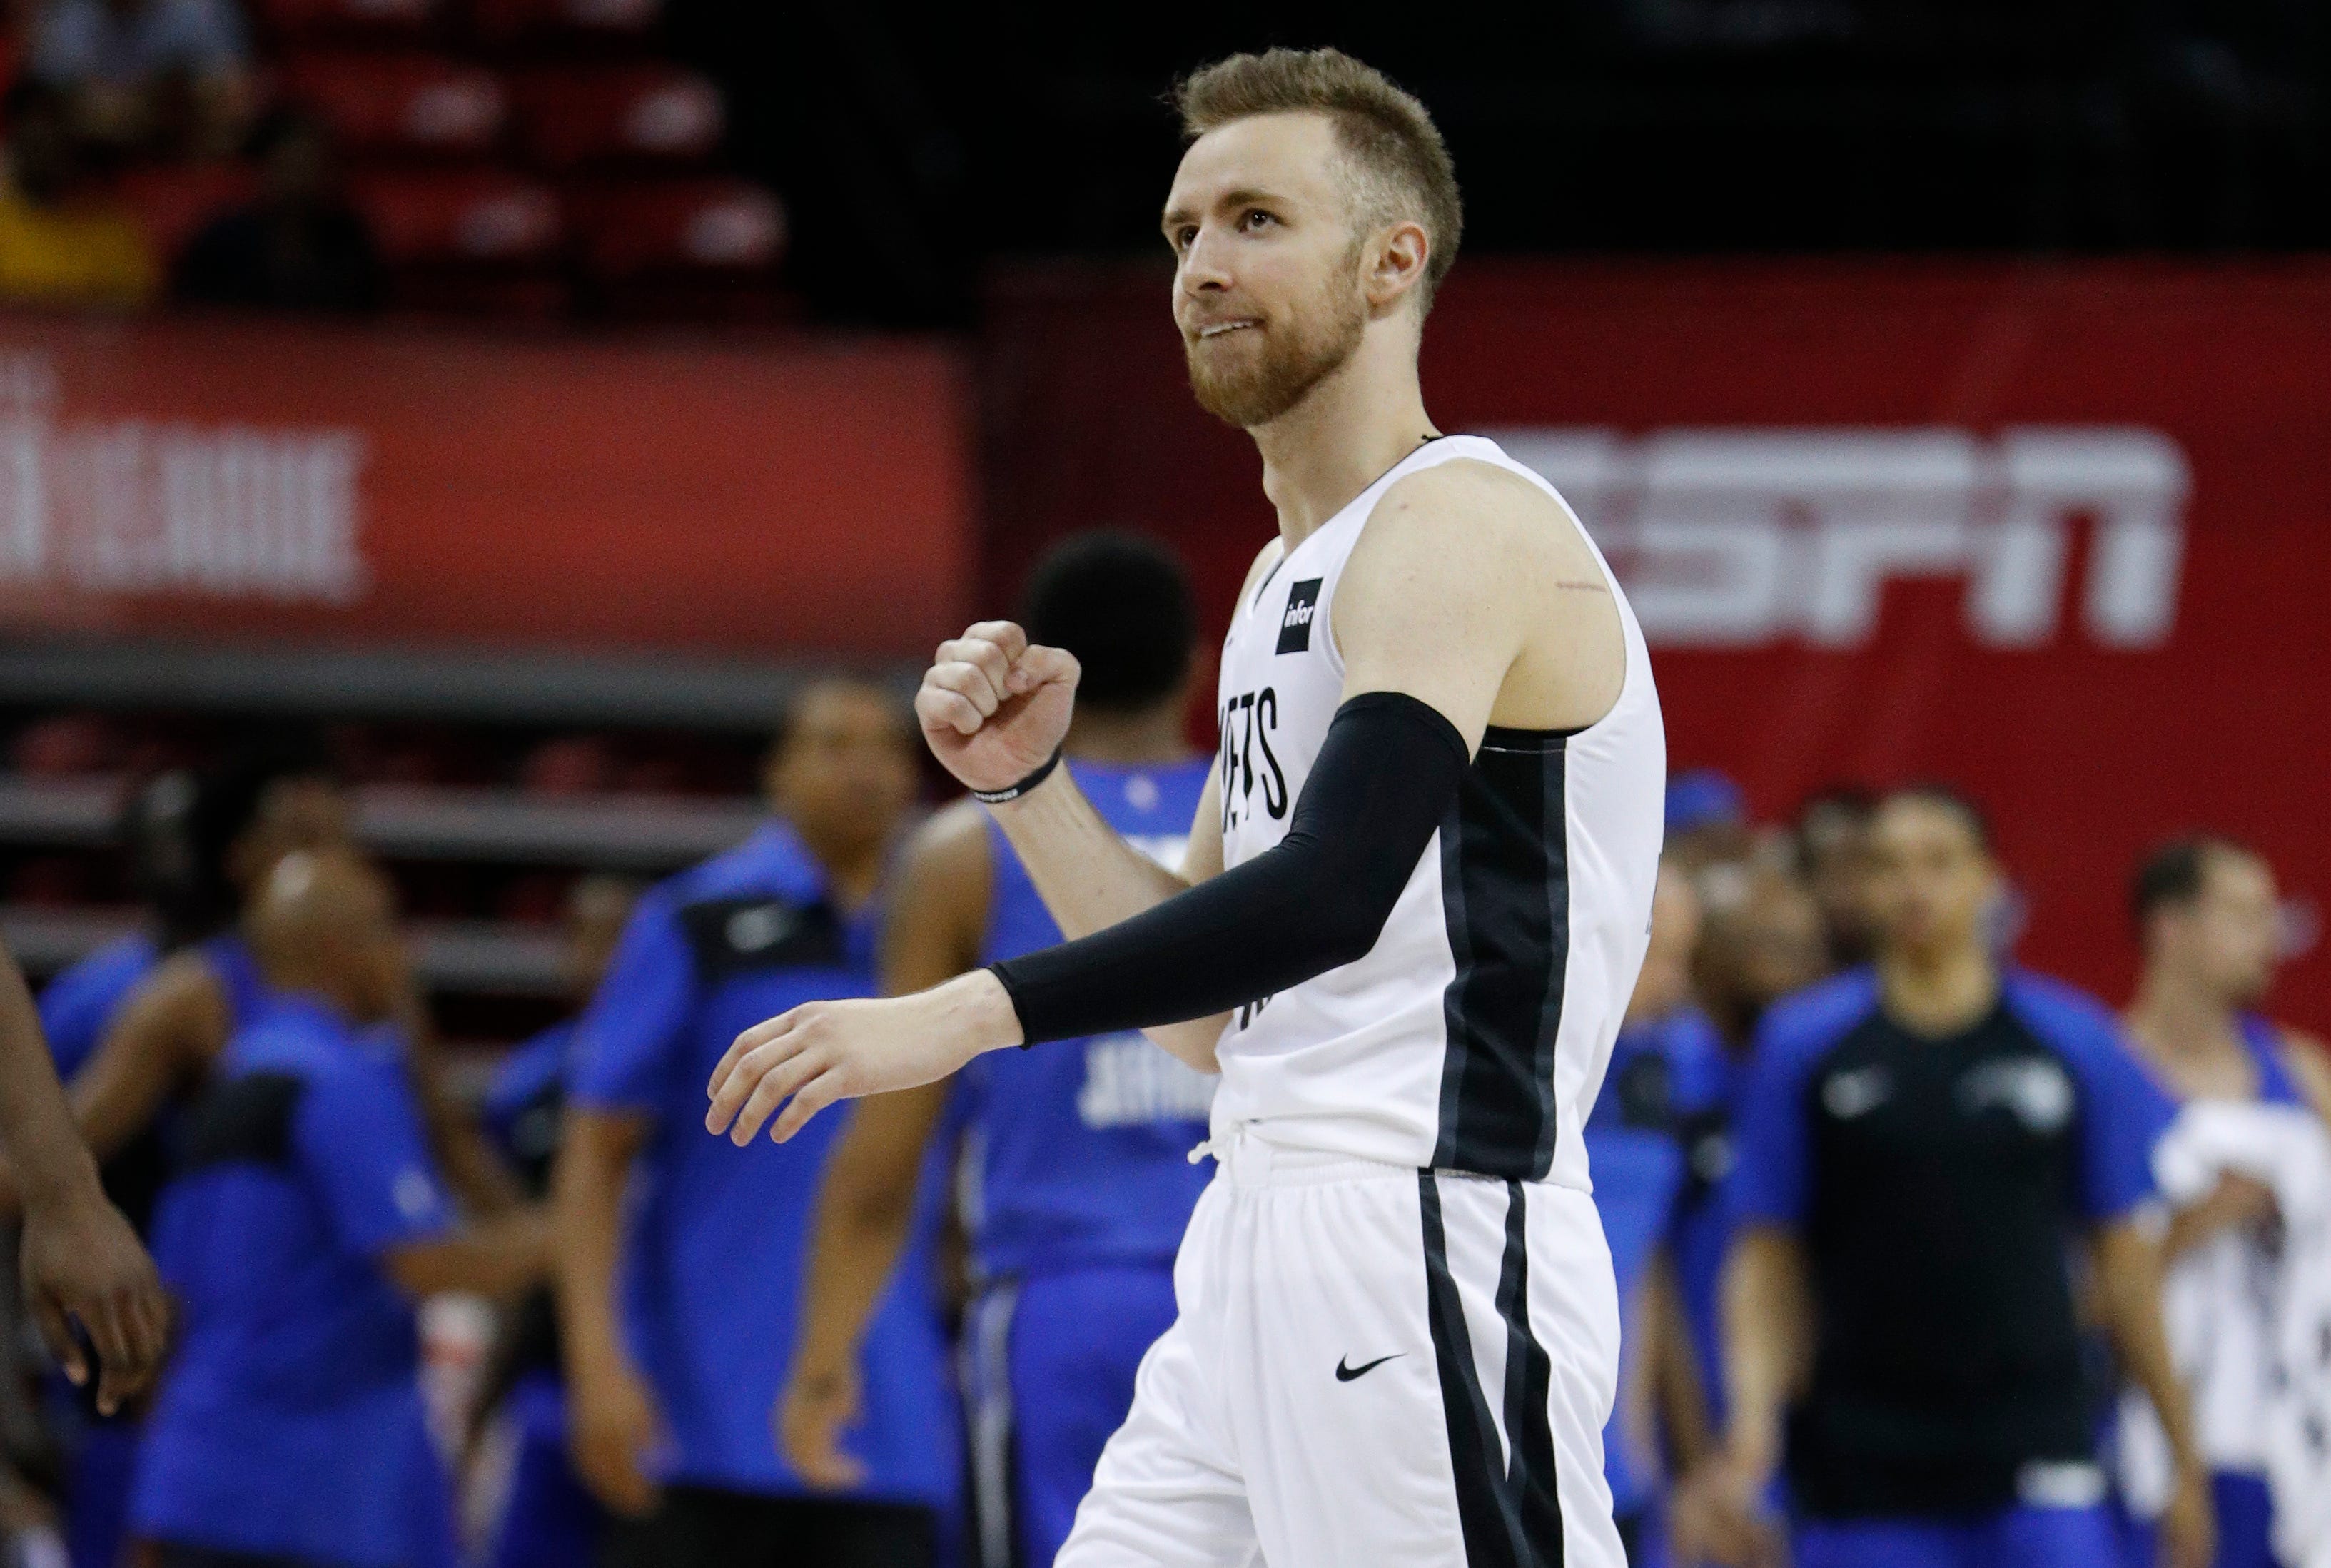 Brooklyn Nets' Dzanan Musa reacts after a play against the Orlando Magic during the second half of an NBA summer league basketball game Wednesday, July 10, 2019, in Las Vegas.